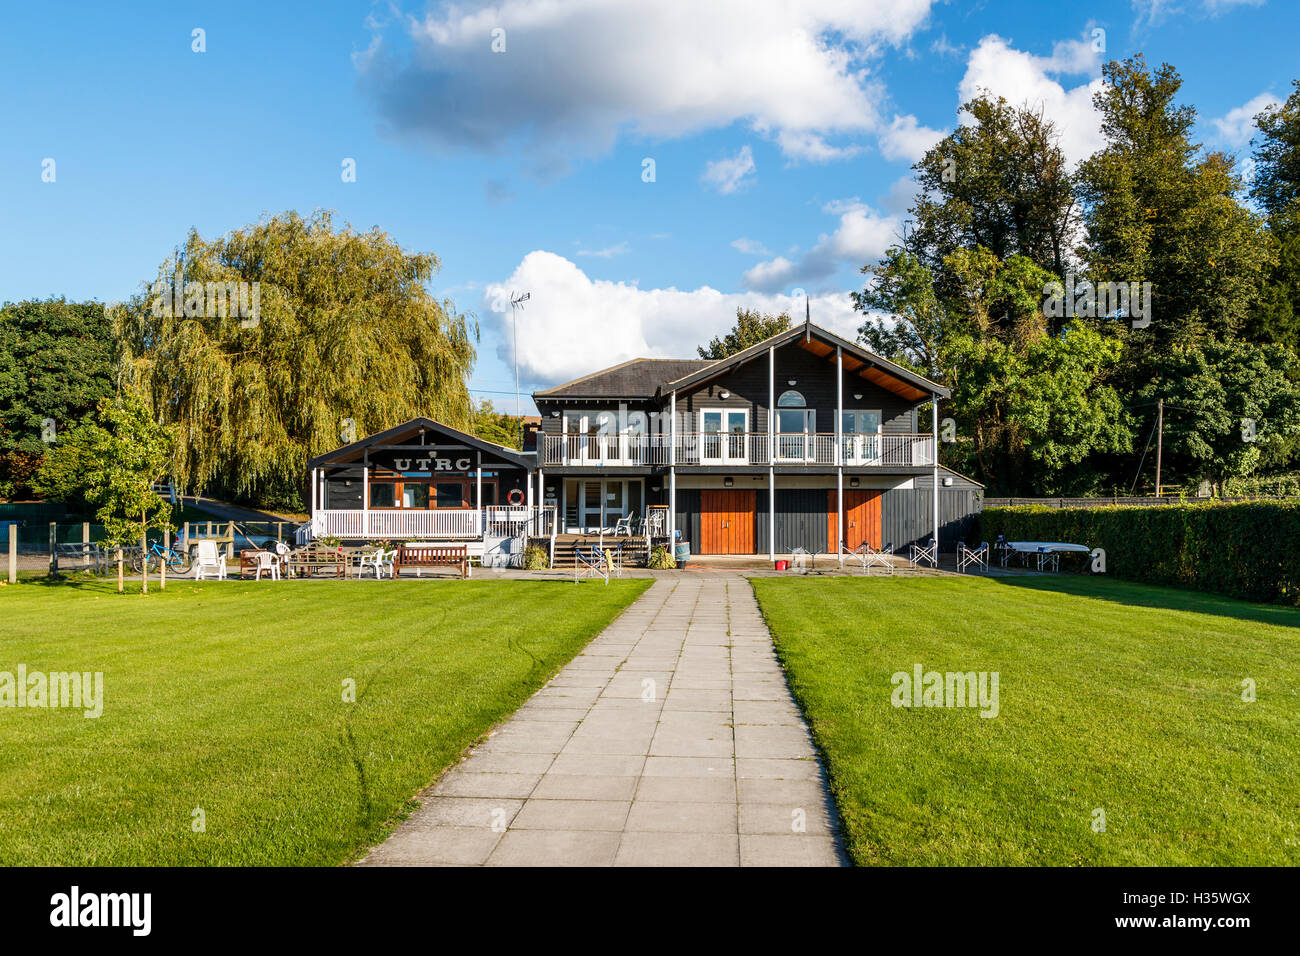 Clubhouse of the Upper Thames Rowing Club at Henley-on-Thames, Oxfordshire, UK on a sunny day with blue sky Stock Photo